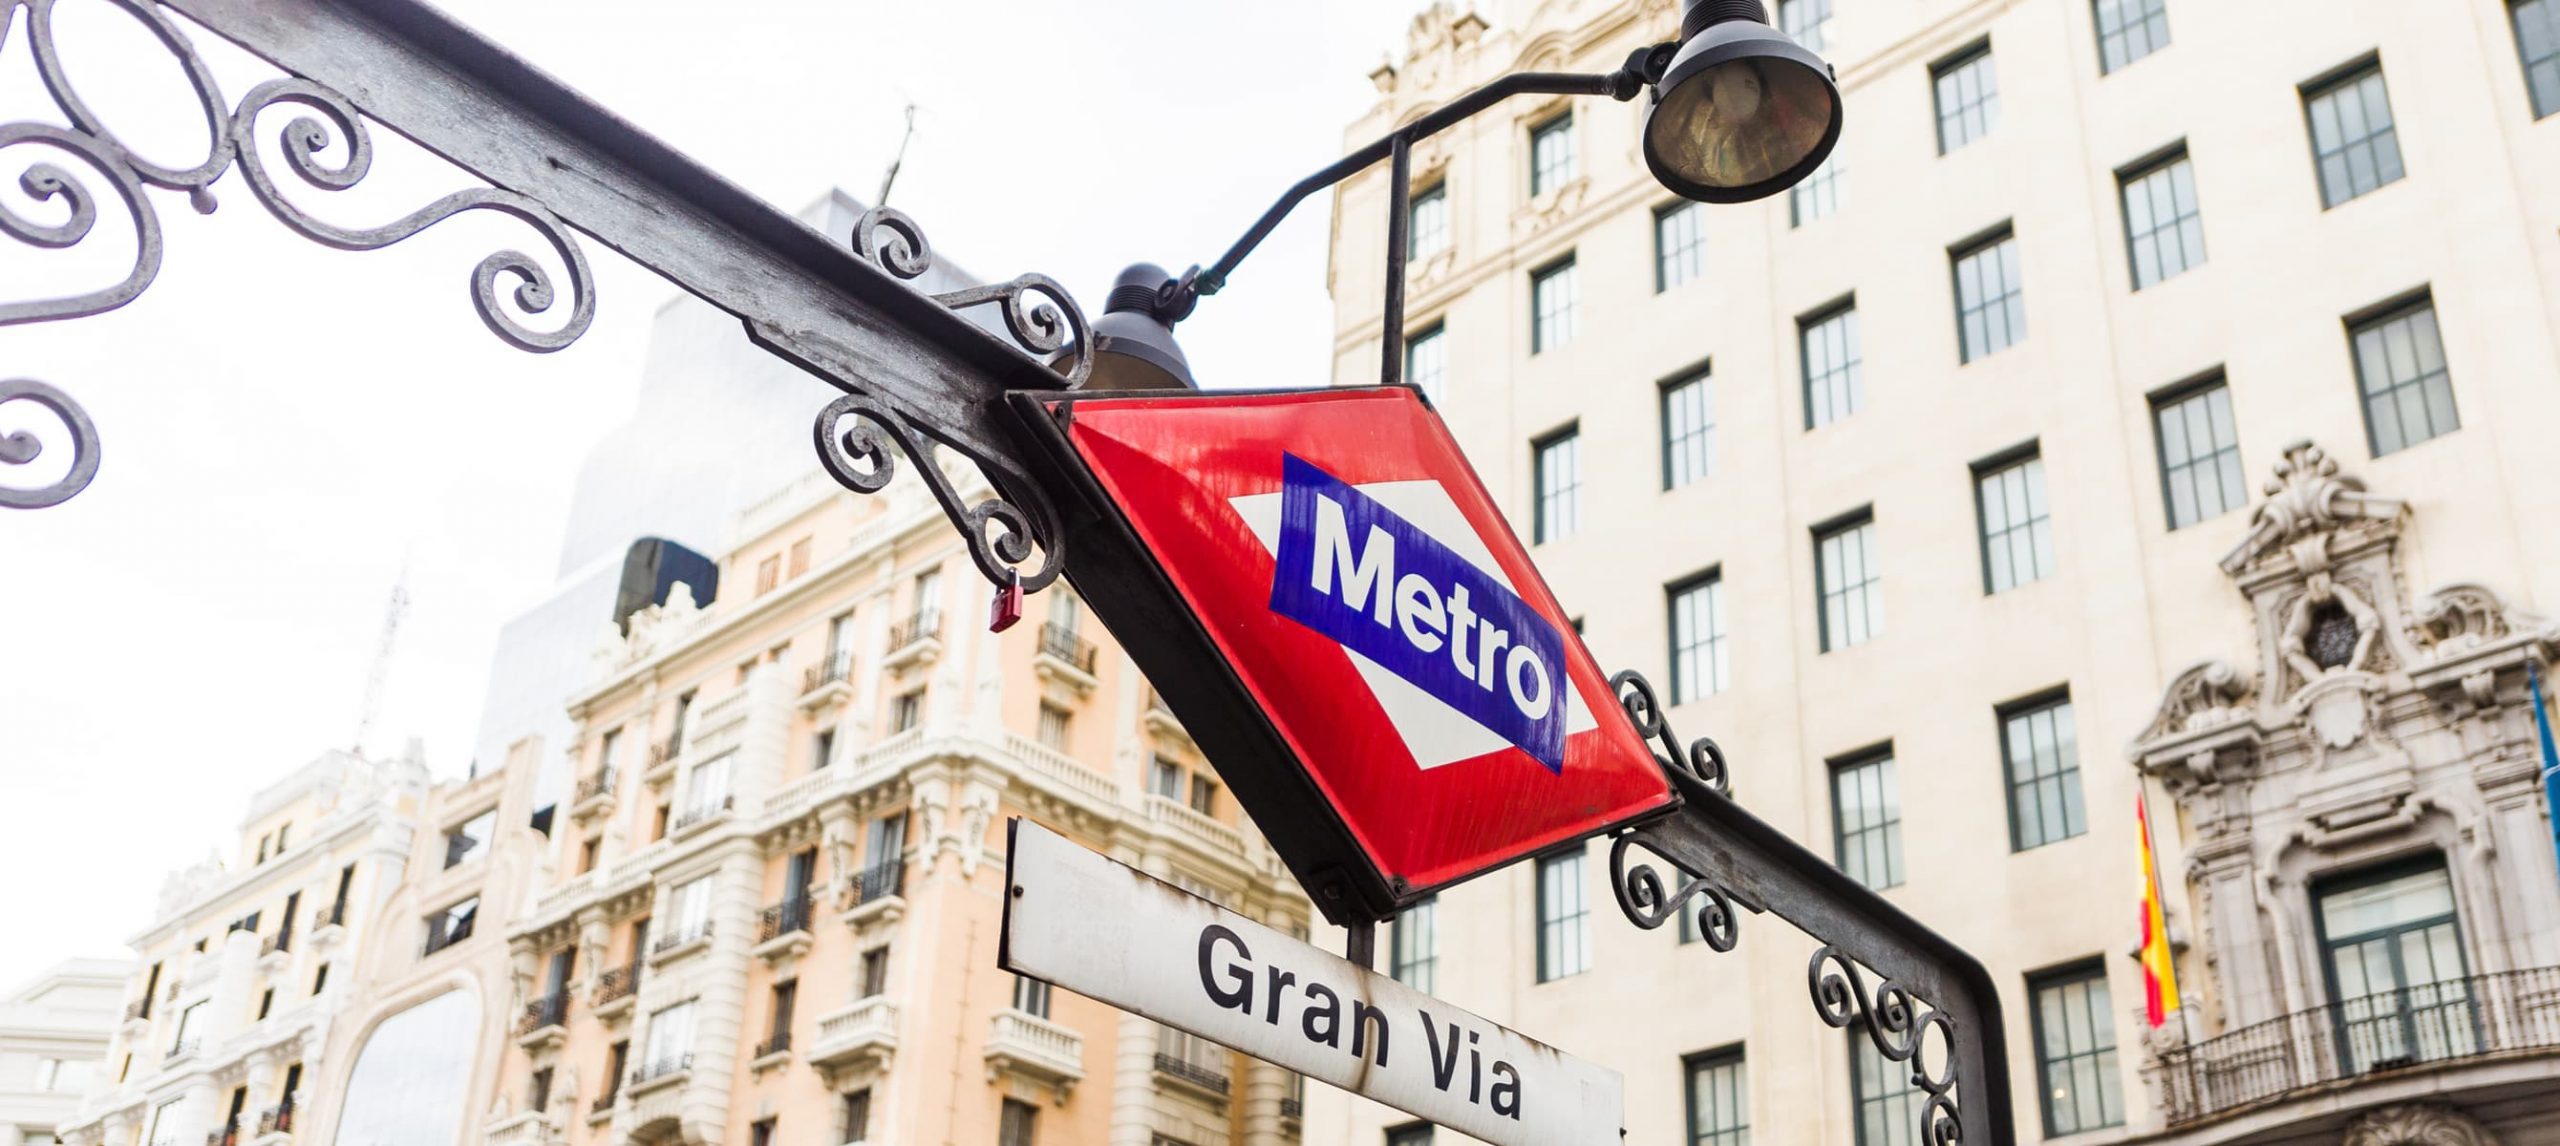 Transportation in Madrid: How To Get Around The City